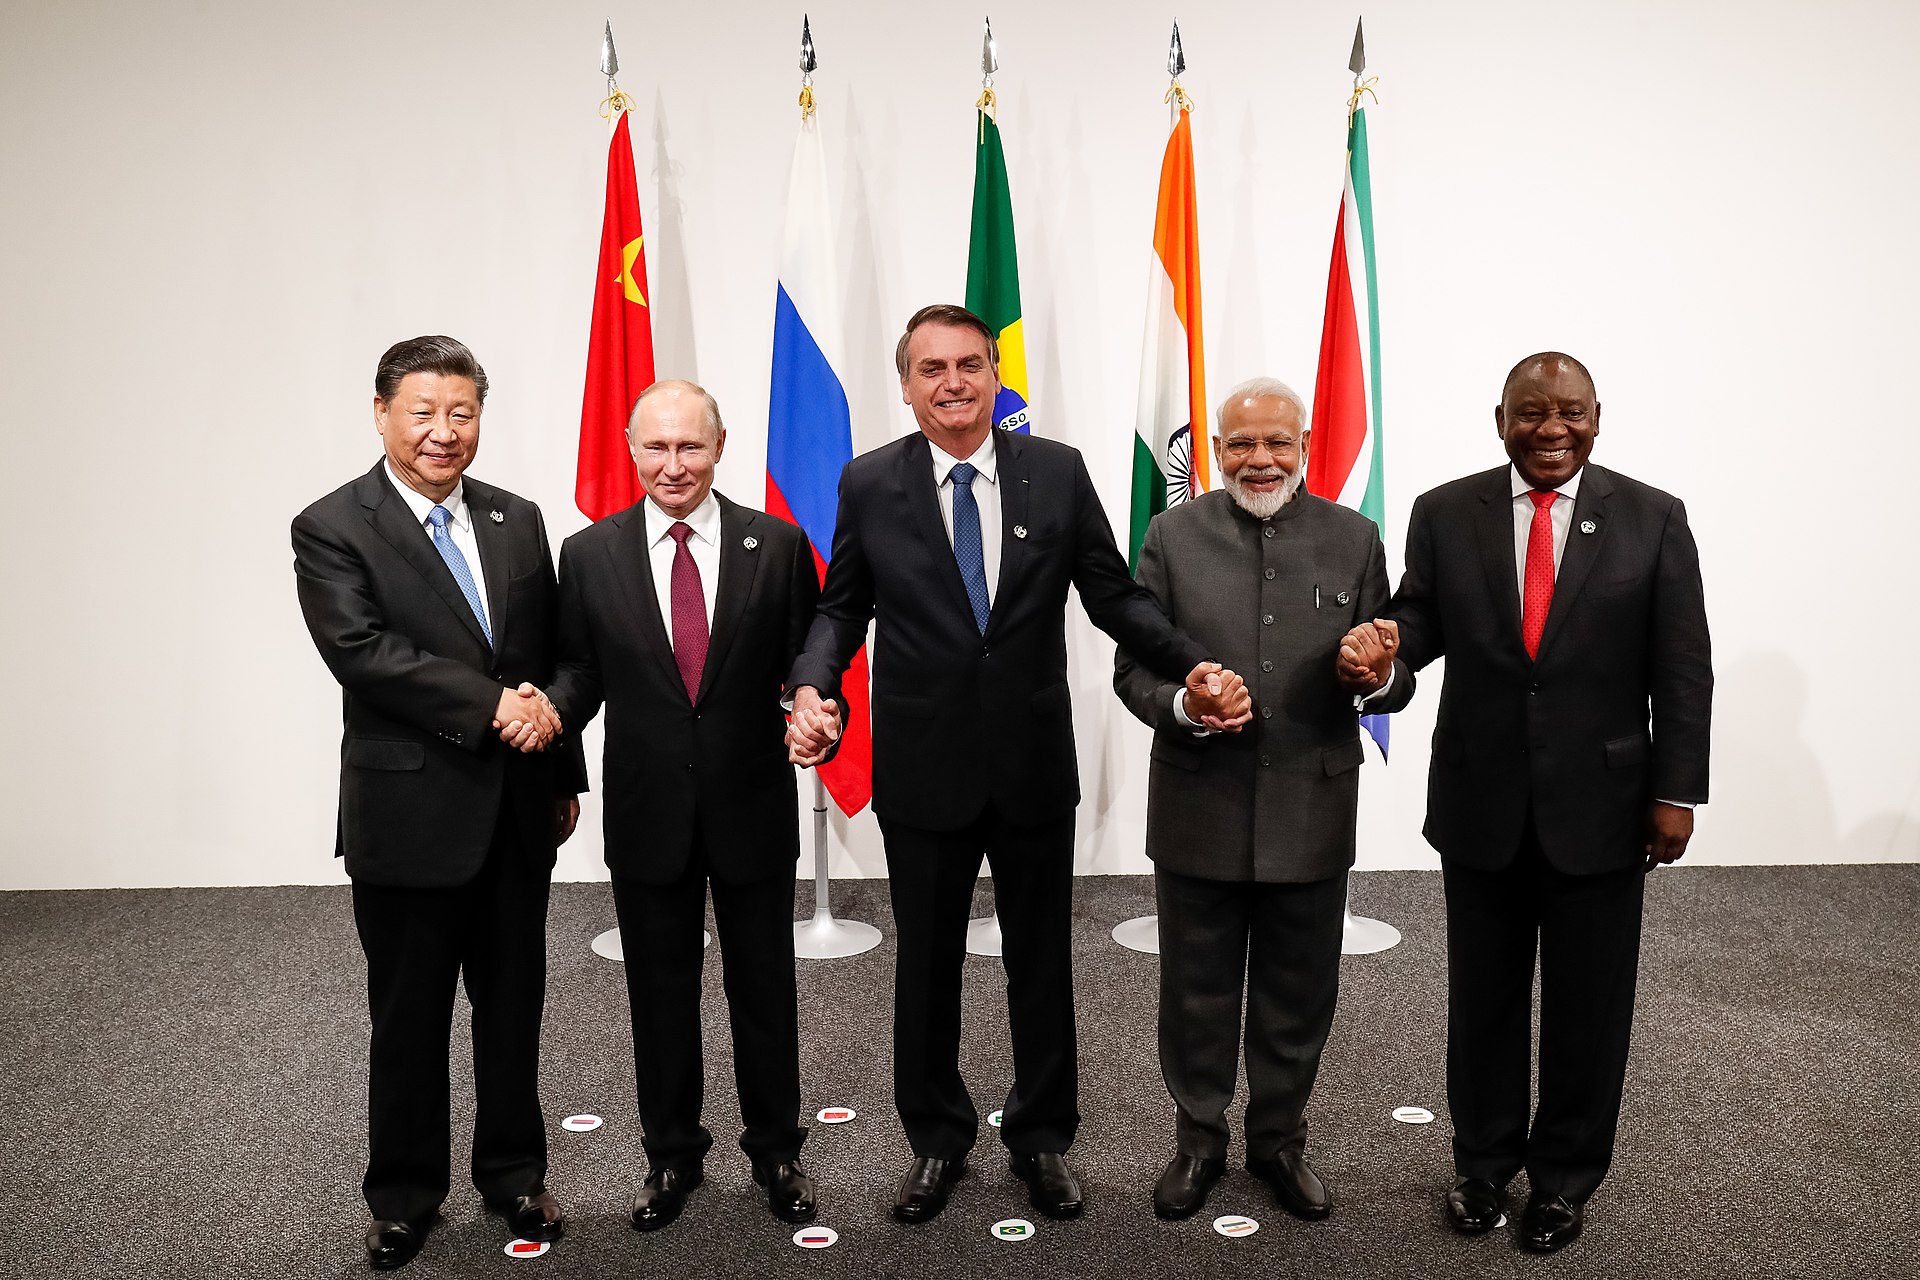 Will a BRICS currency replace the dollar as a reserve currency?